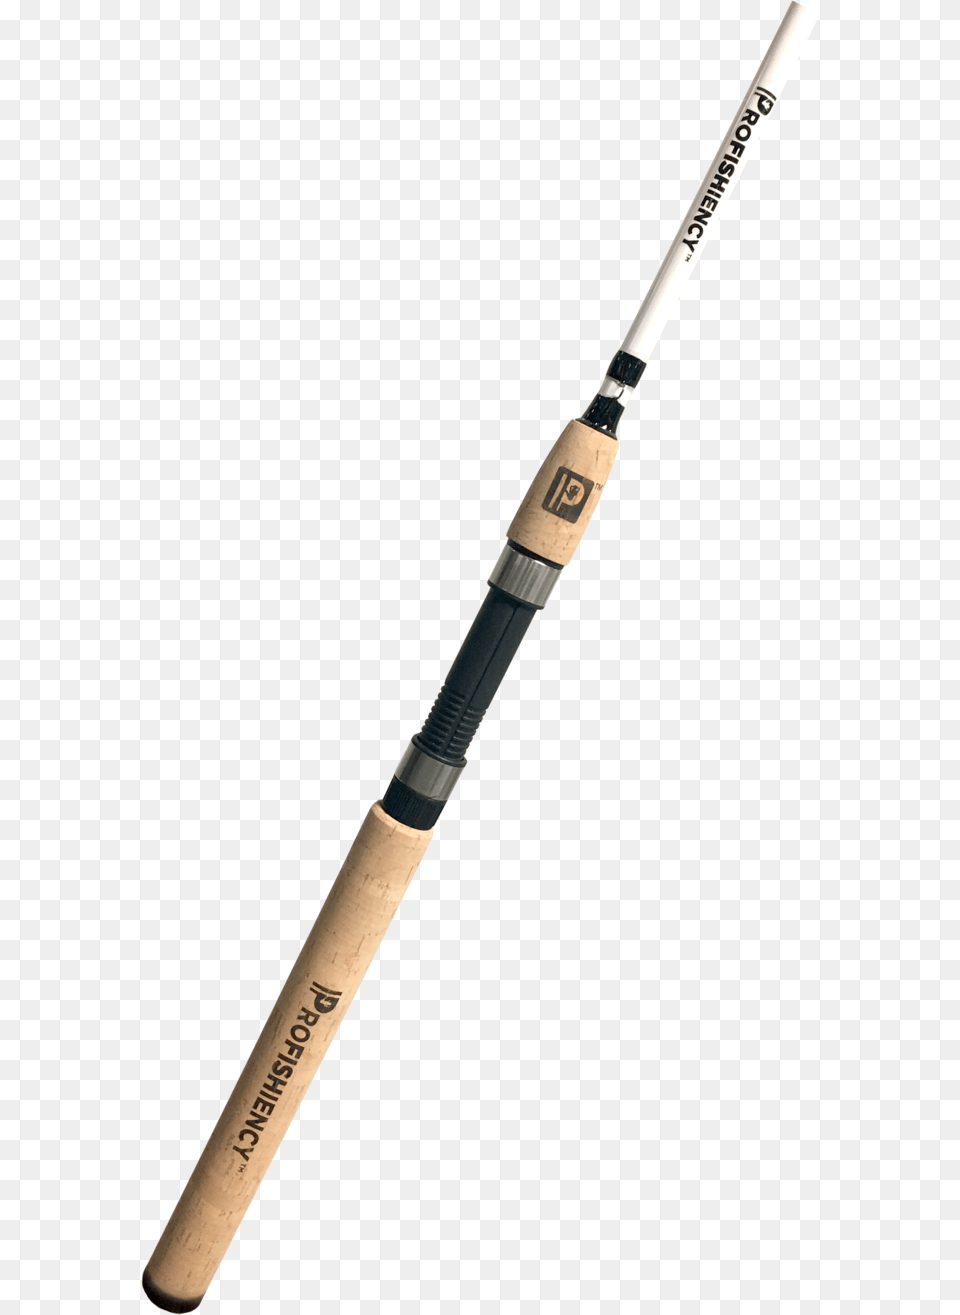 Profishiency 7ft Spinning Rod, Brush, Device, Tool, Cricket Png Image